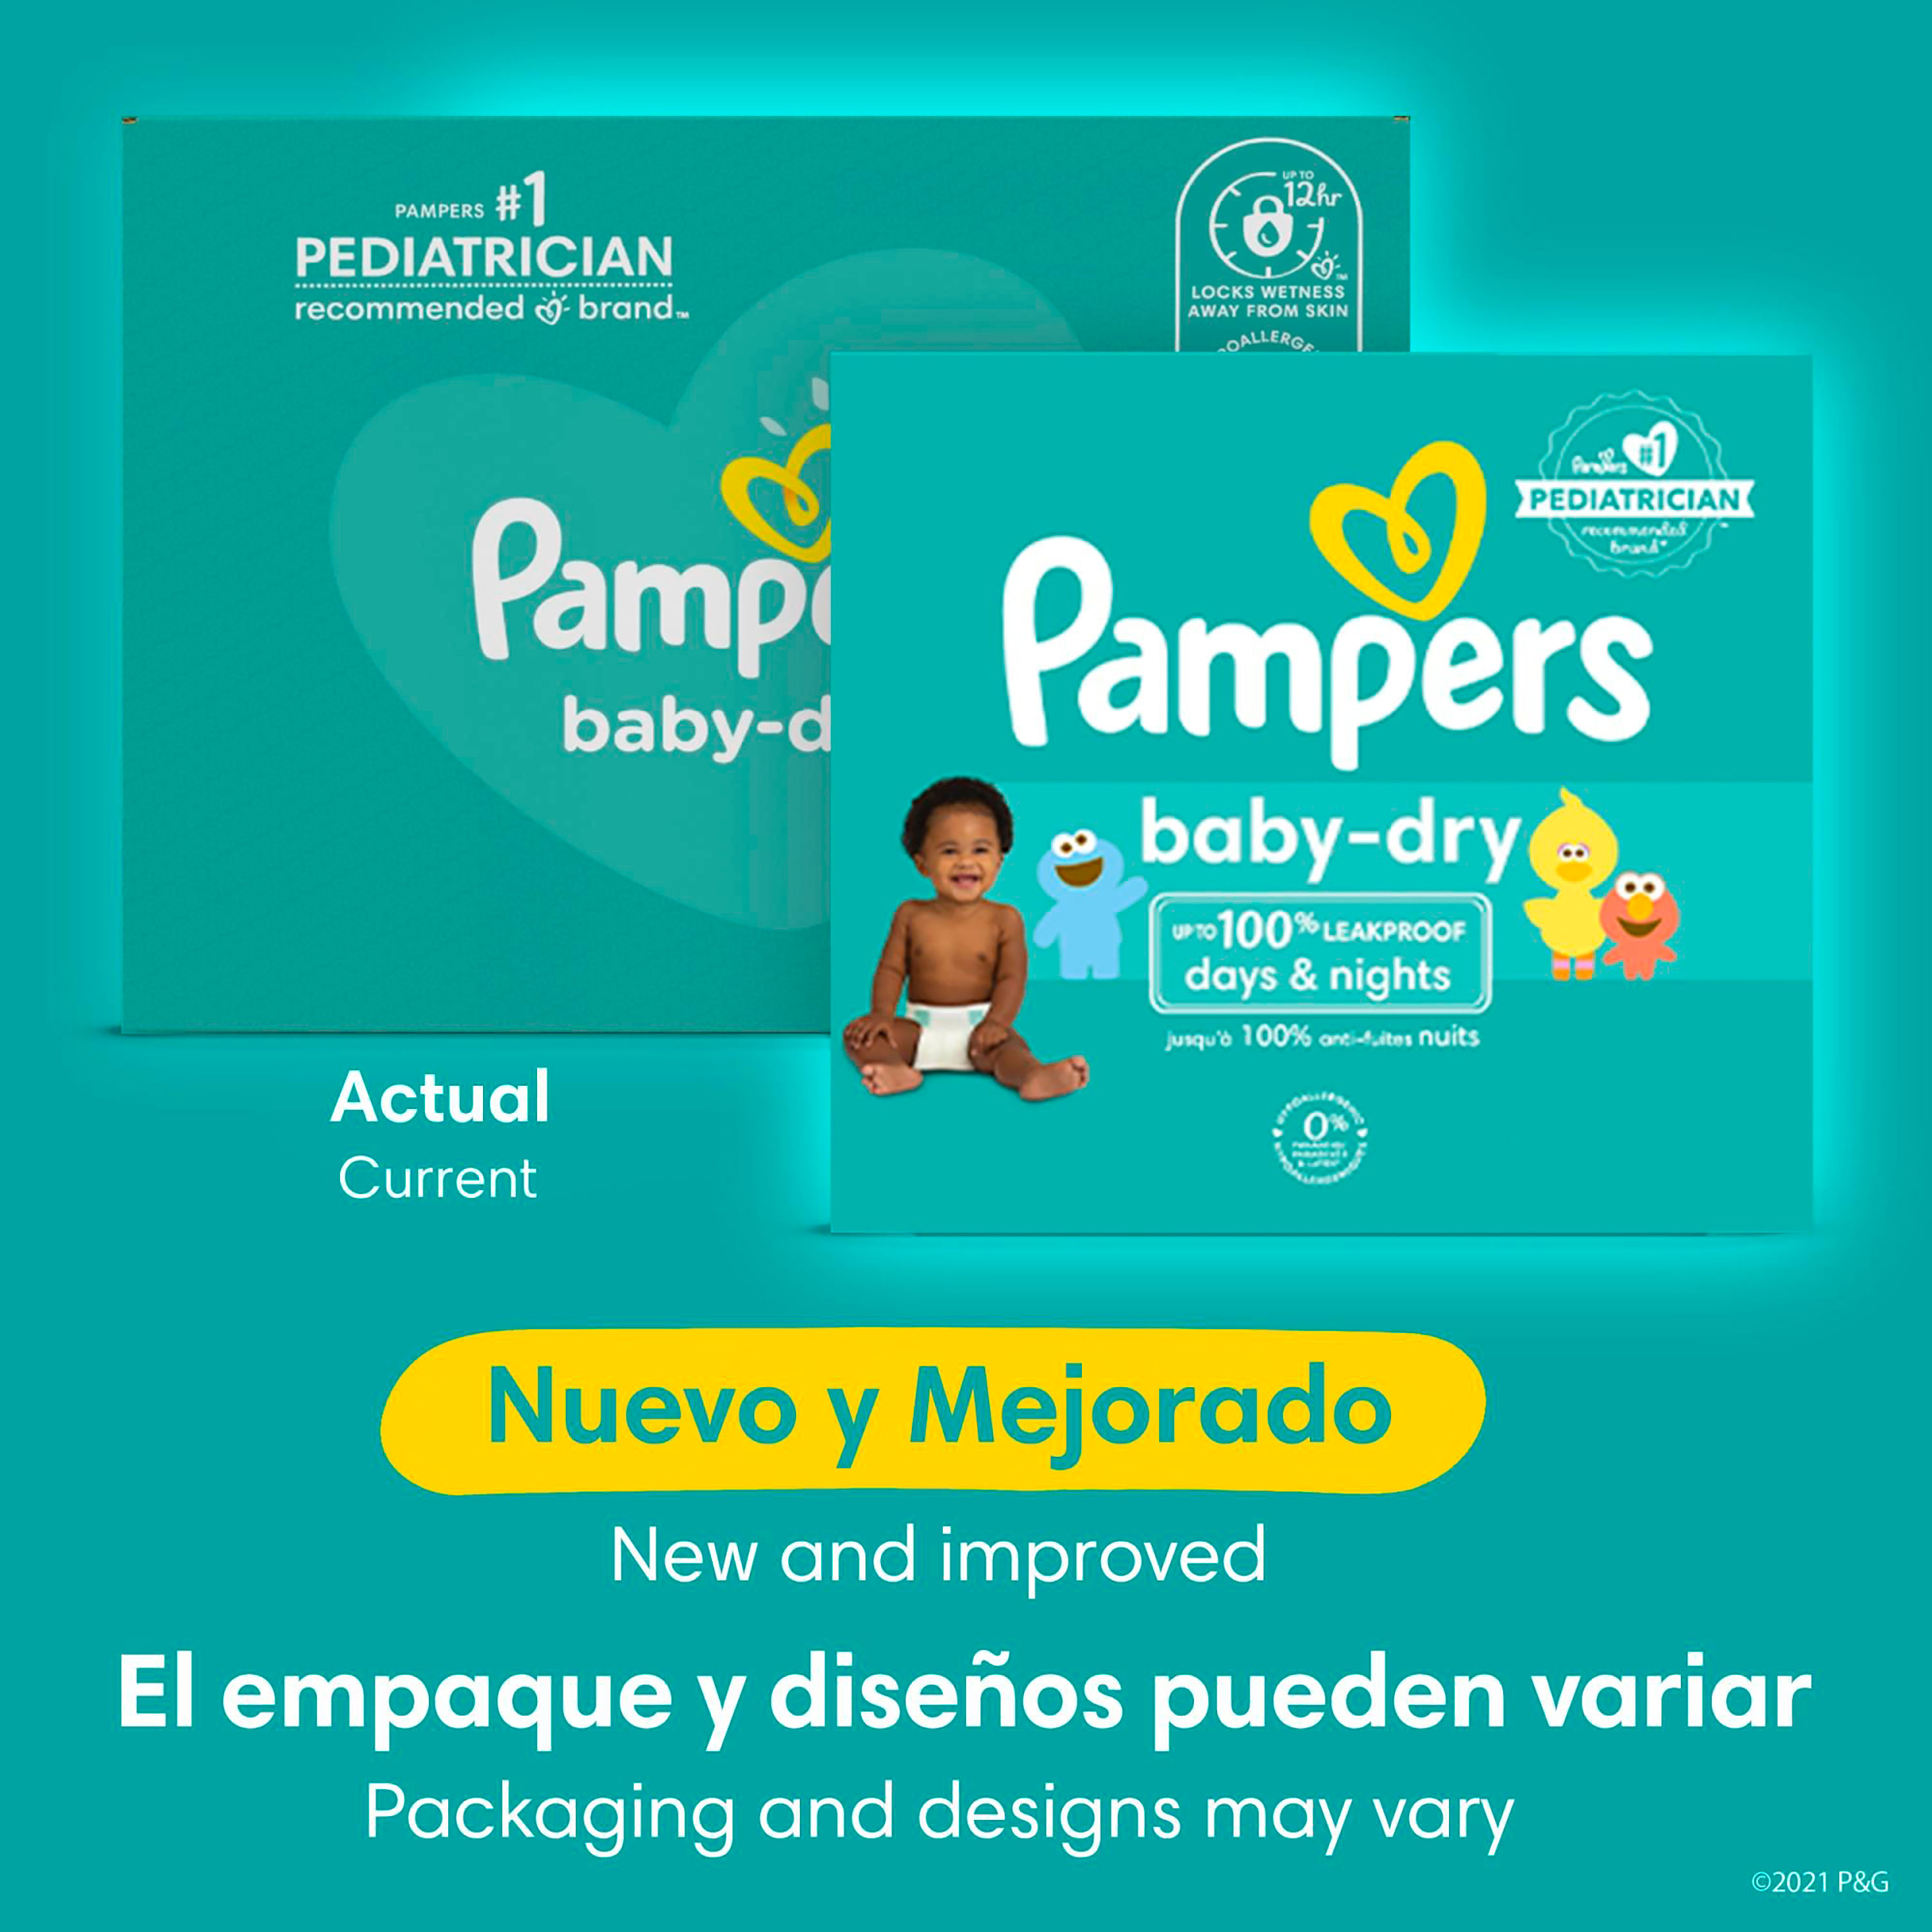  Pampers Pañales Swaddlers, talla 4 (22-37 libras), 144 unidades  : Bebés